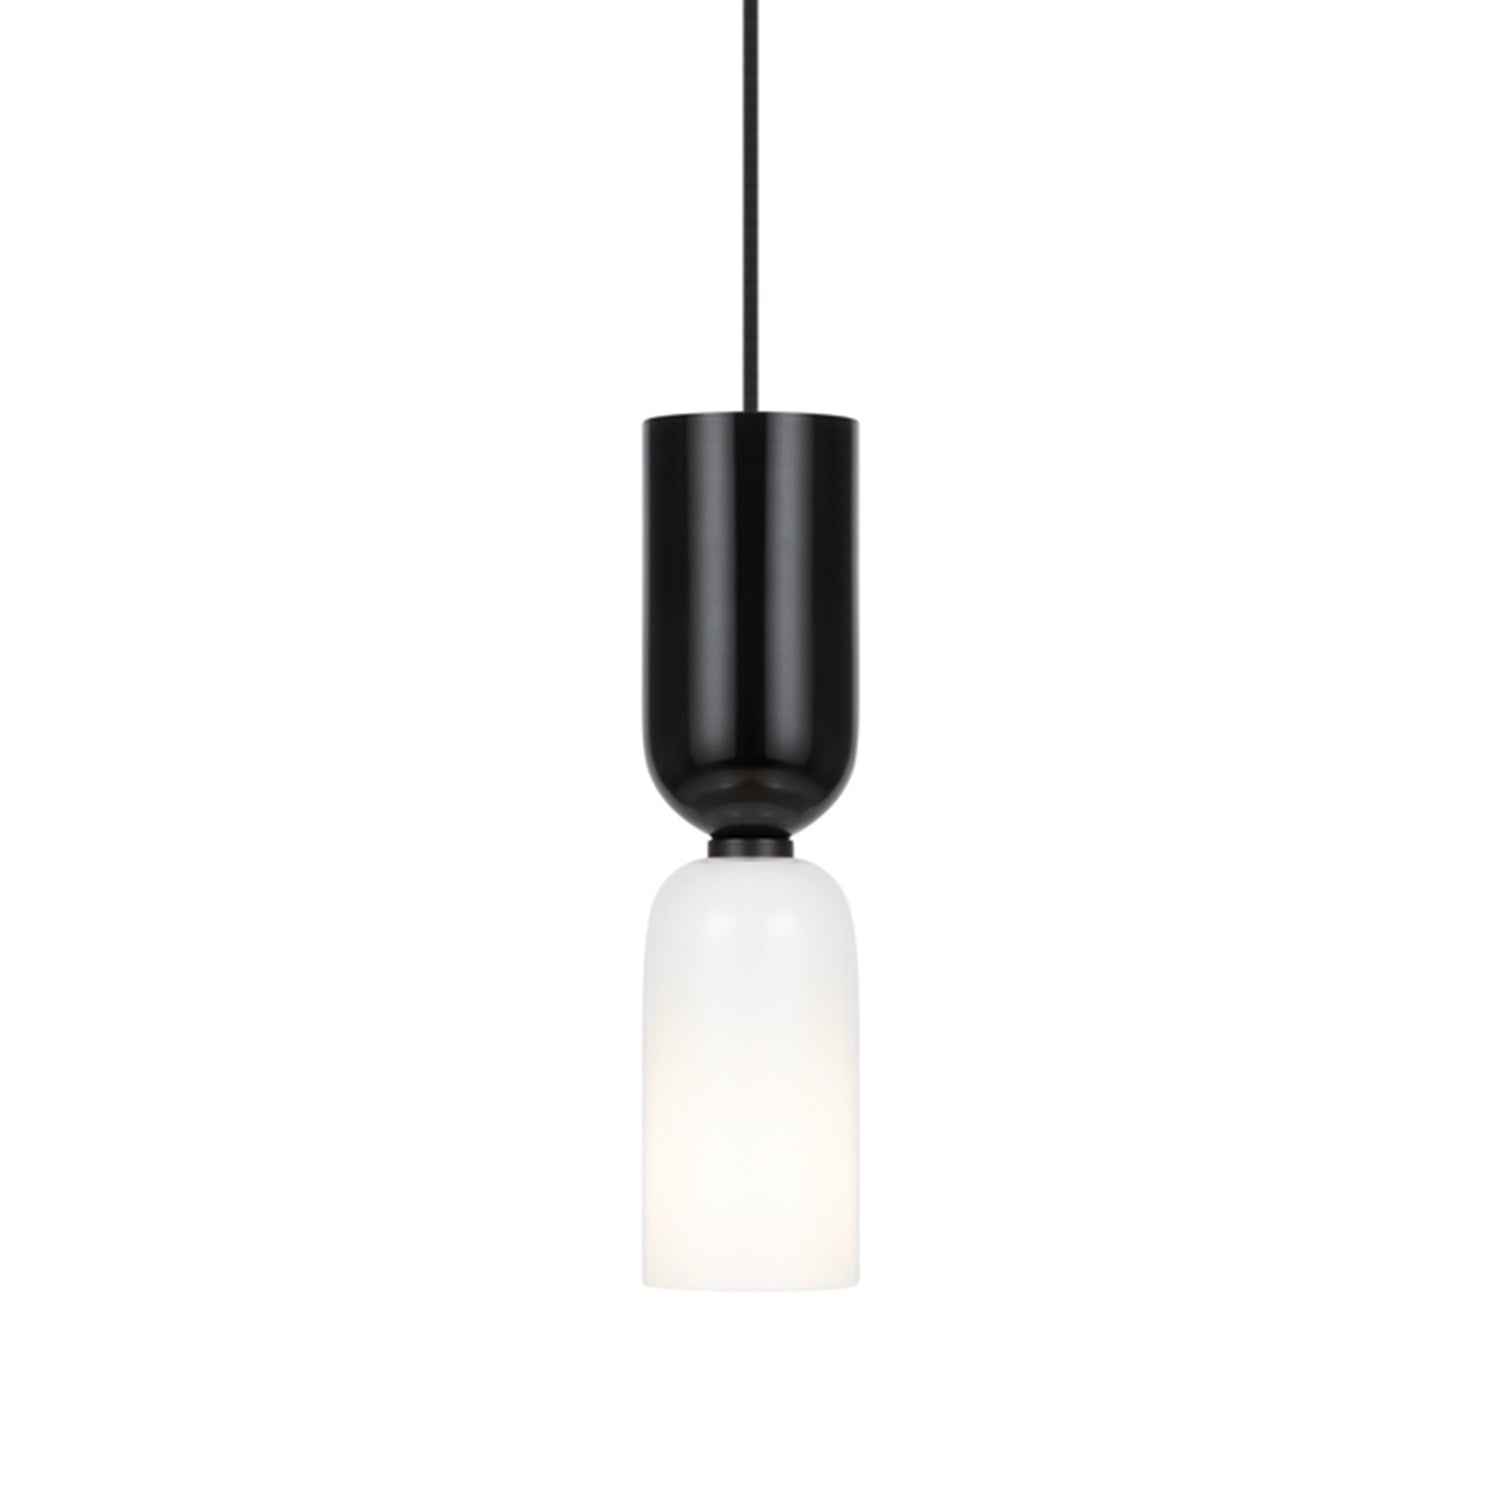 MEMORY - Two-tone designer pendant light in steel and glass